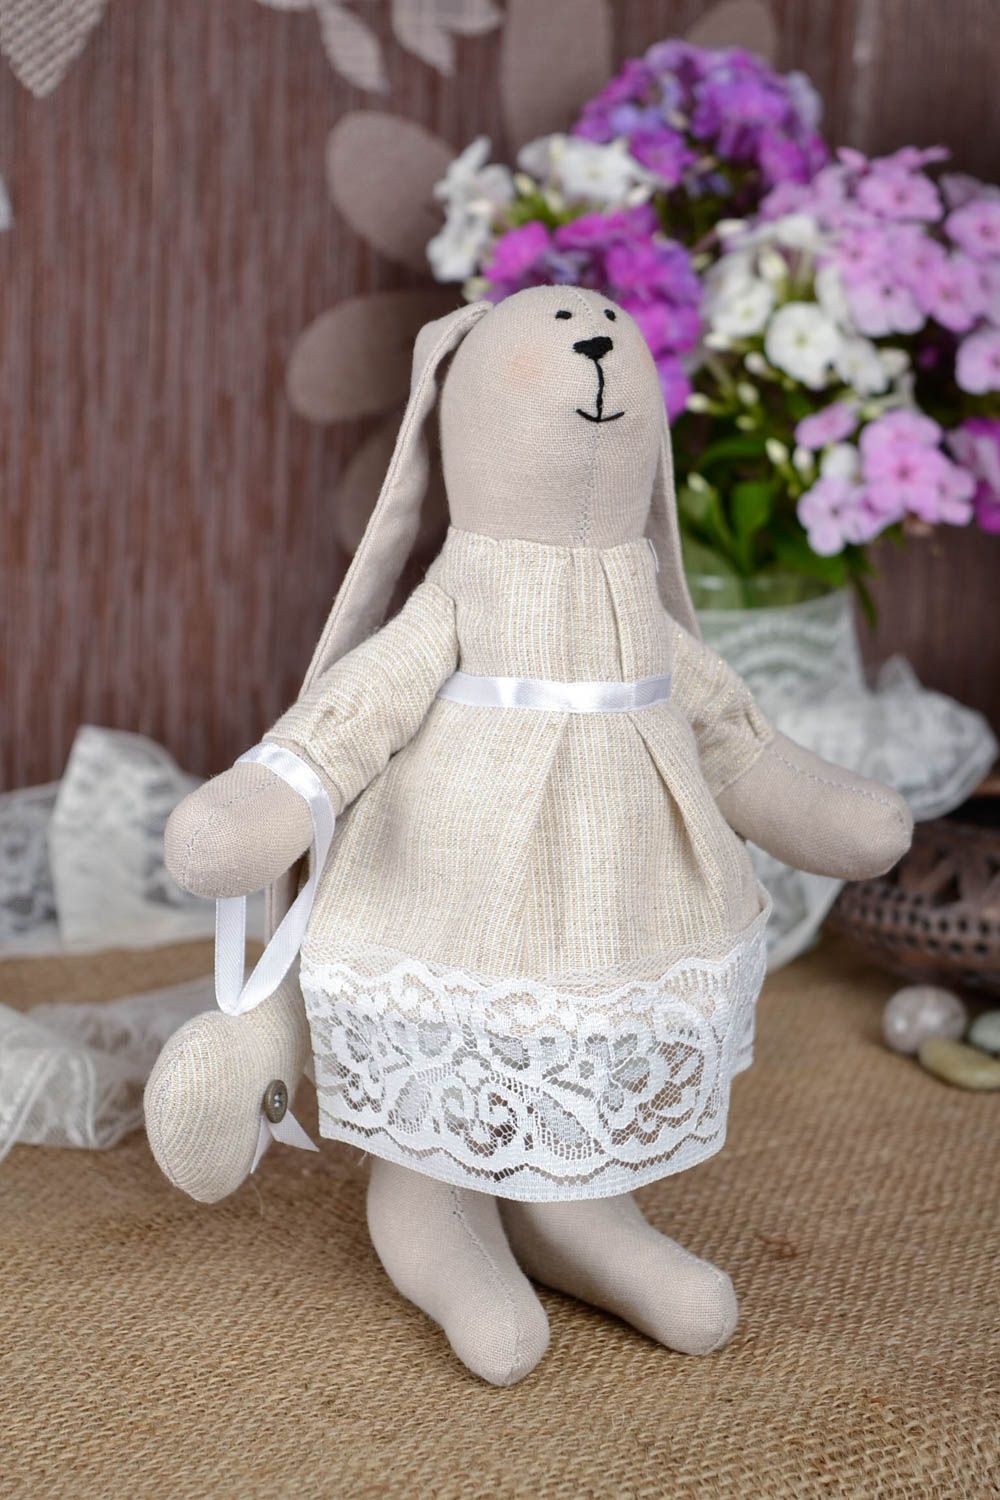 Handmade toy soft toy rabbit toy stuffed animals cool gifts for gifts home decor photo 1